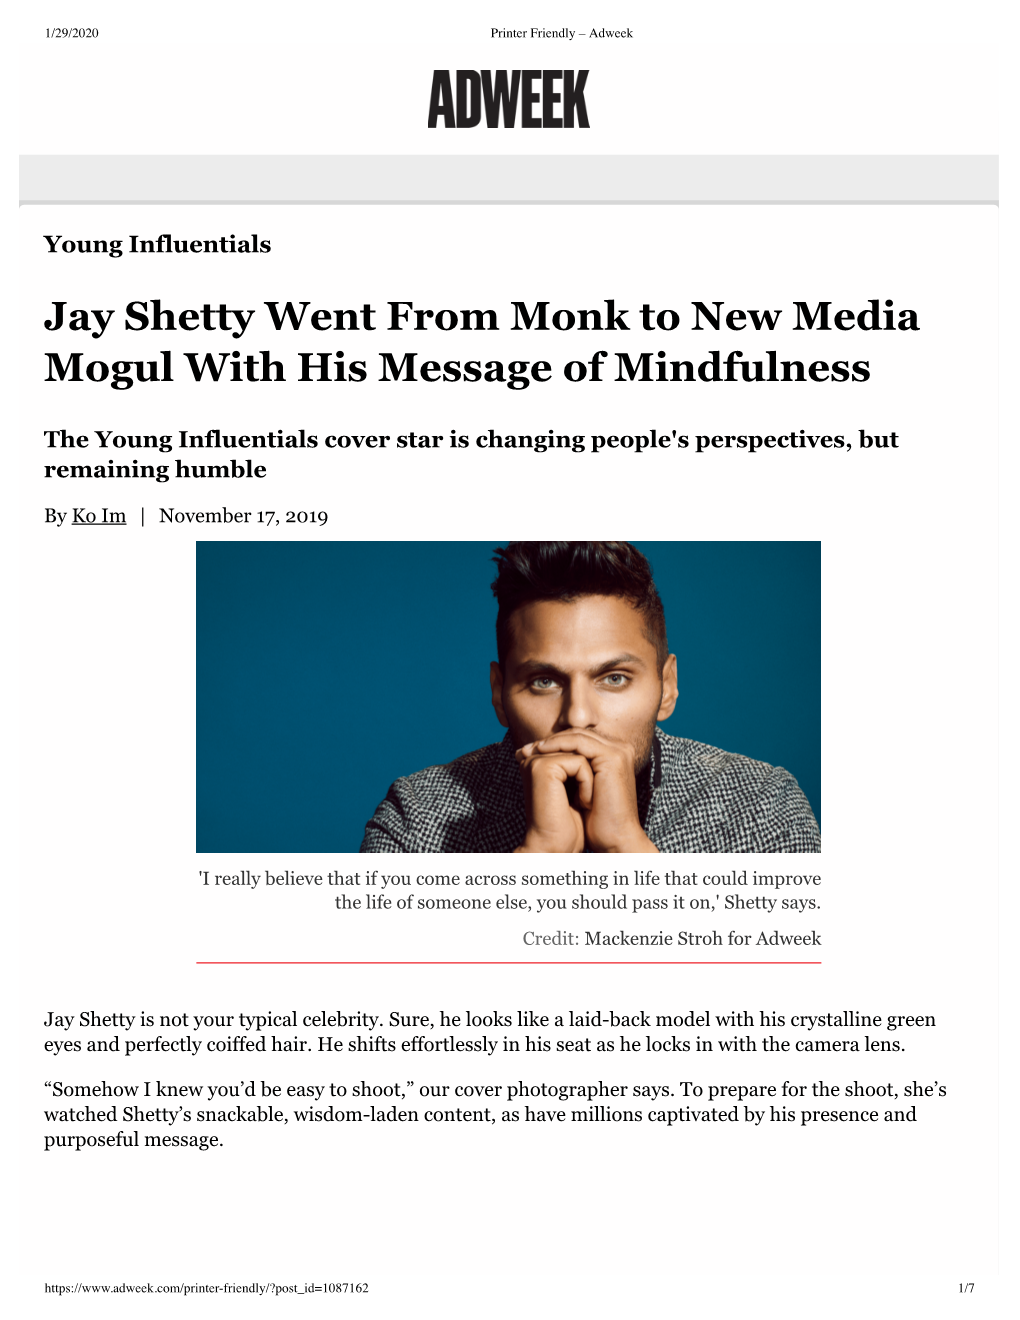 Jay Shetty Went from Monk to New Media Mogul with His Message of Mindfulness